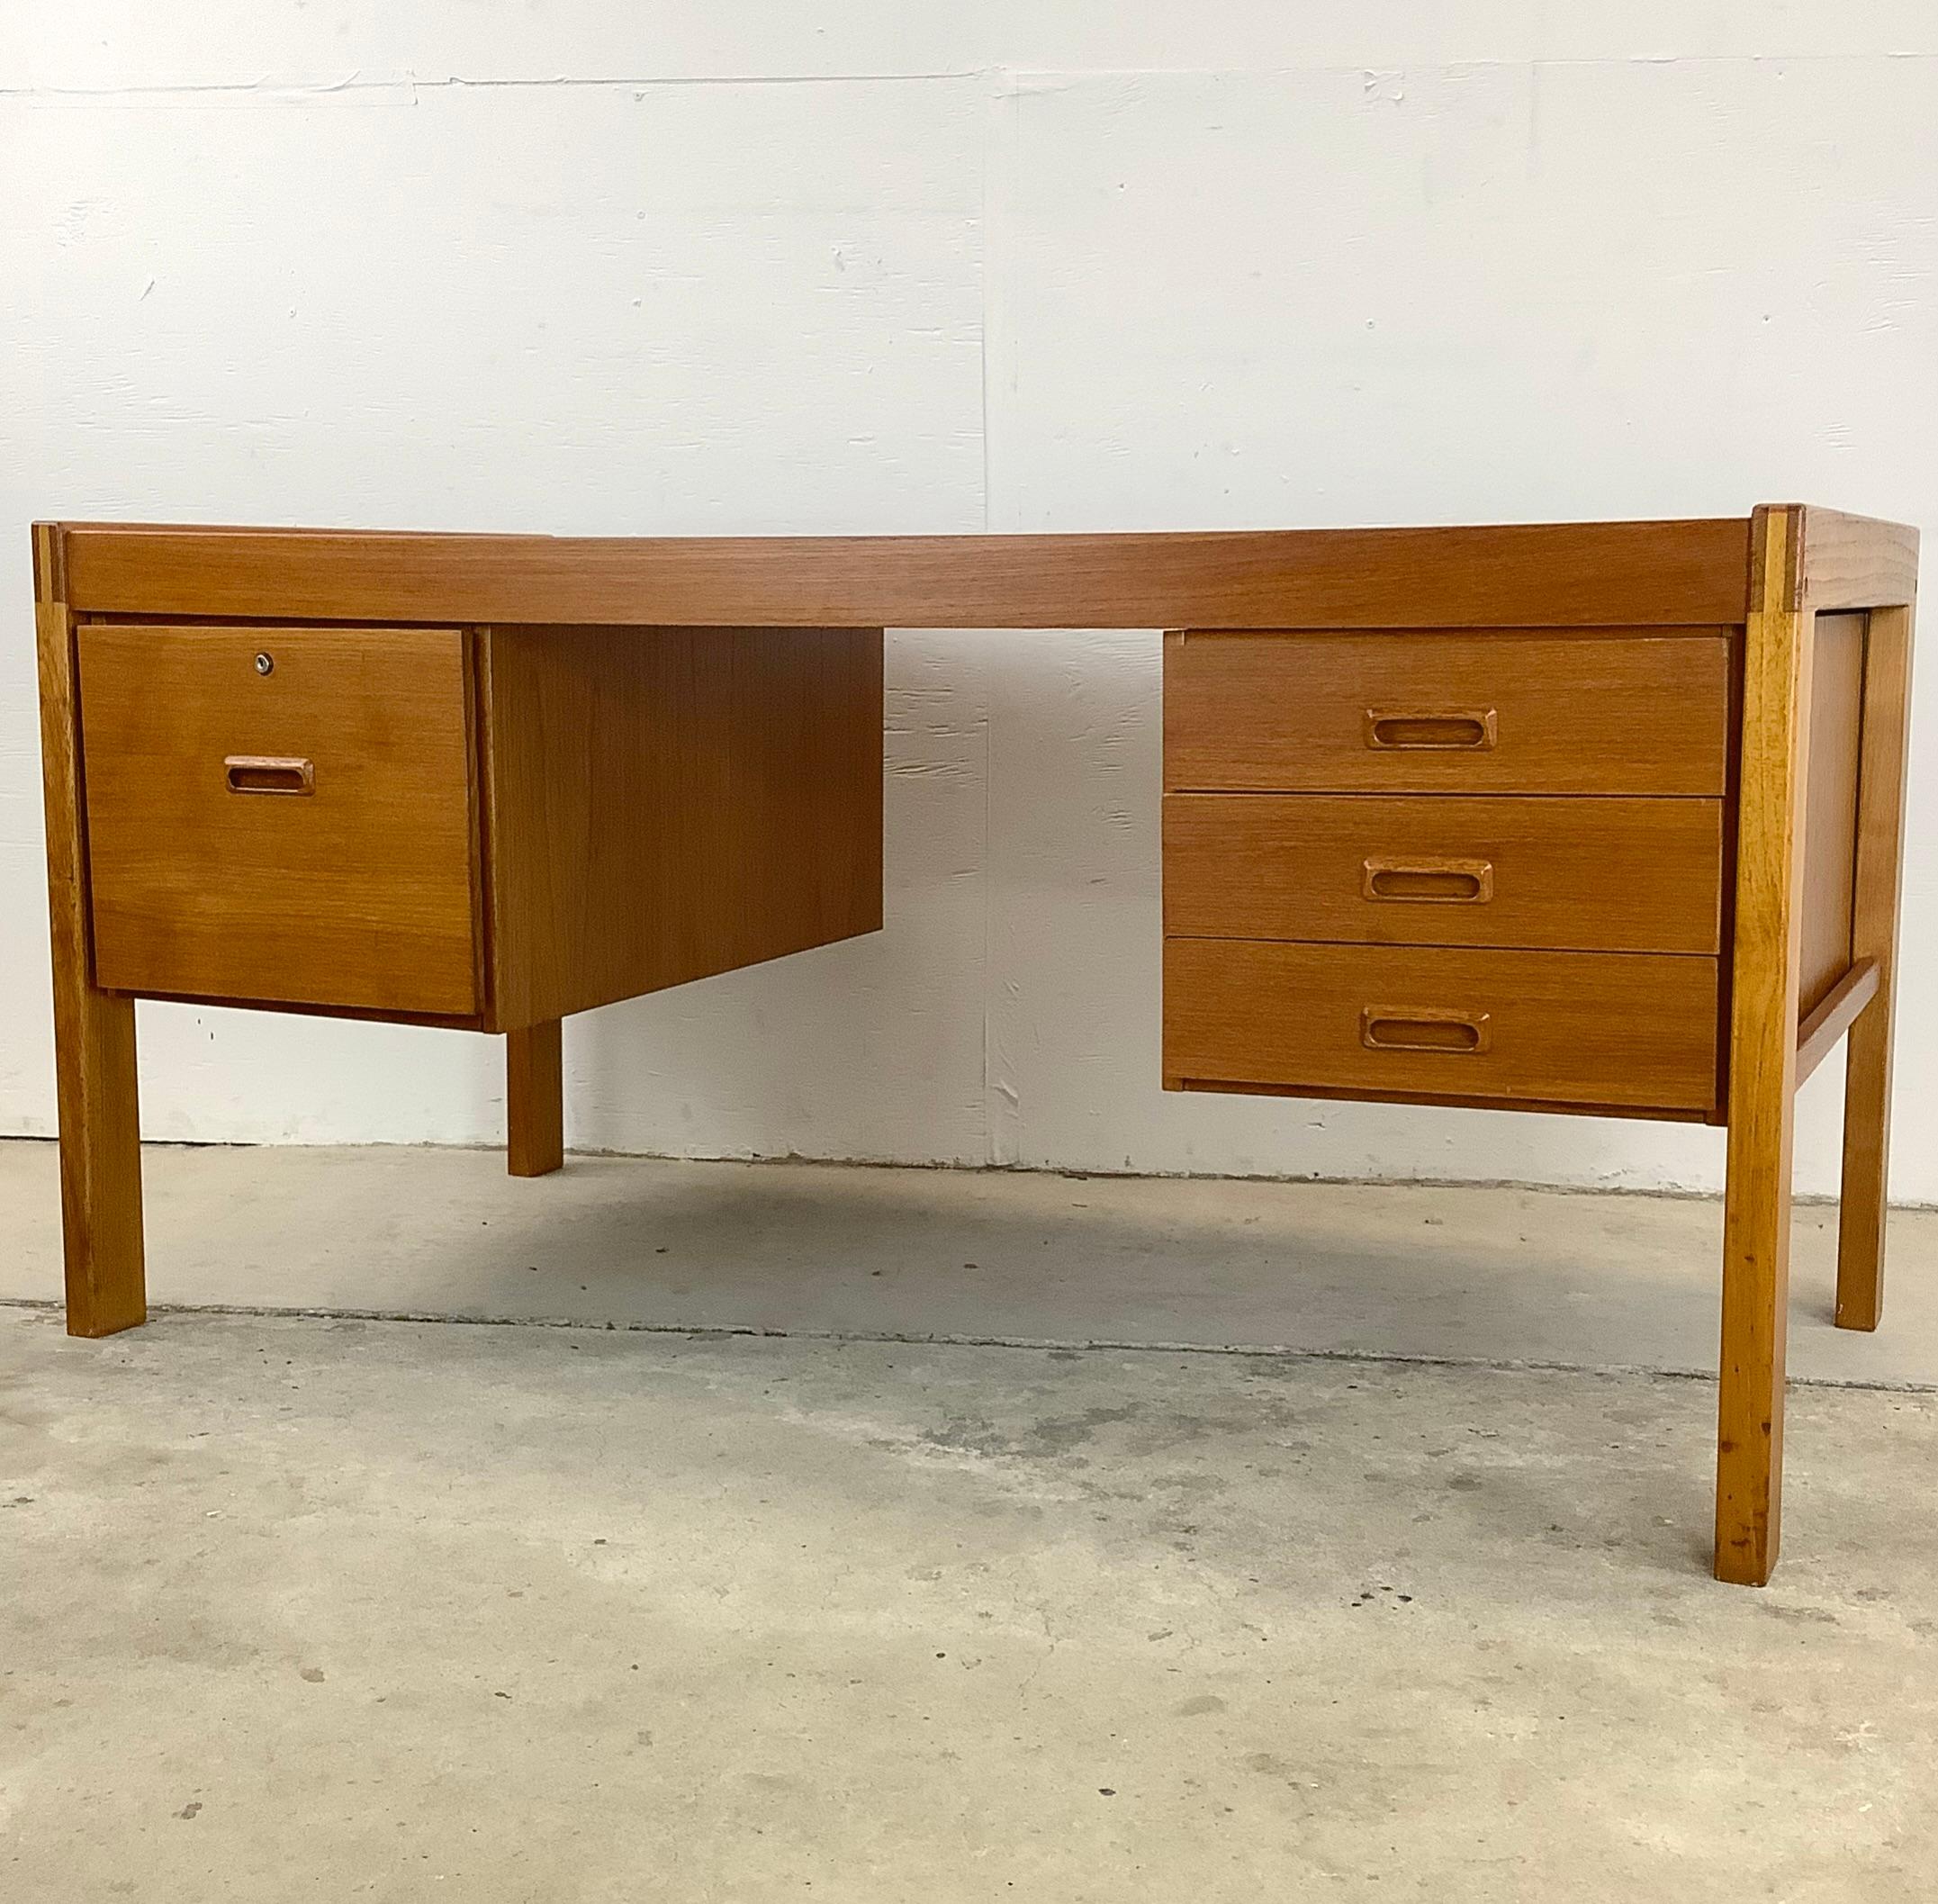 Discover a desk that beautifully combines form and function with this Danish Modern Teak writing desk. This piece is a tribute to iconic Scandinavian design and the enduring appeal of it's vintage teak finish. Imagine this desk in your workspace,